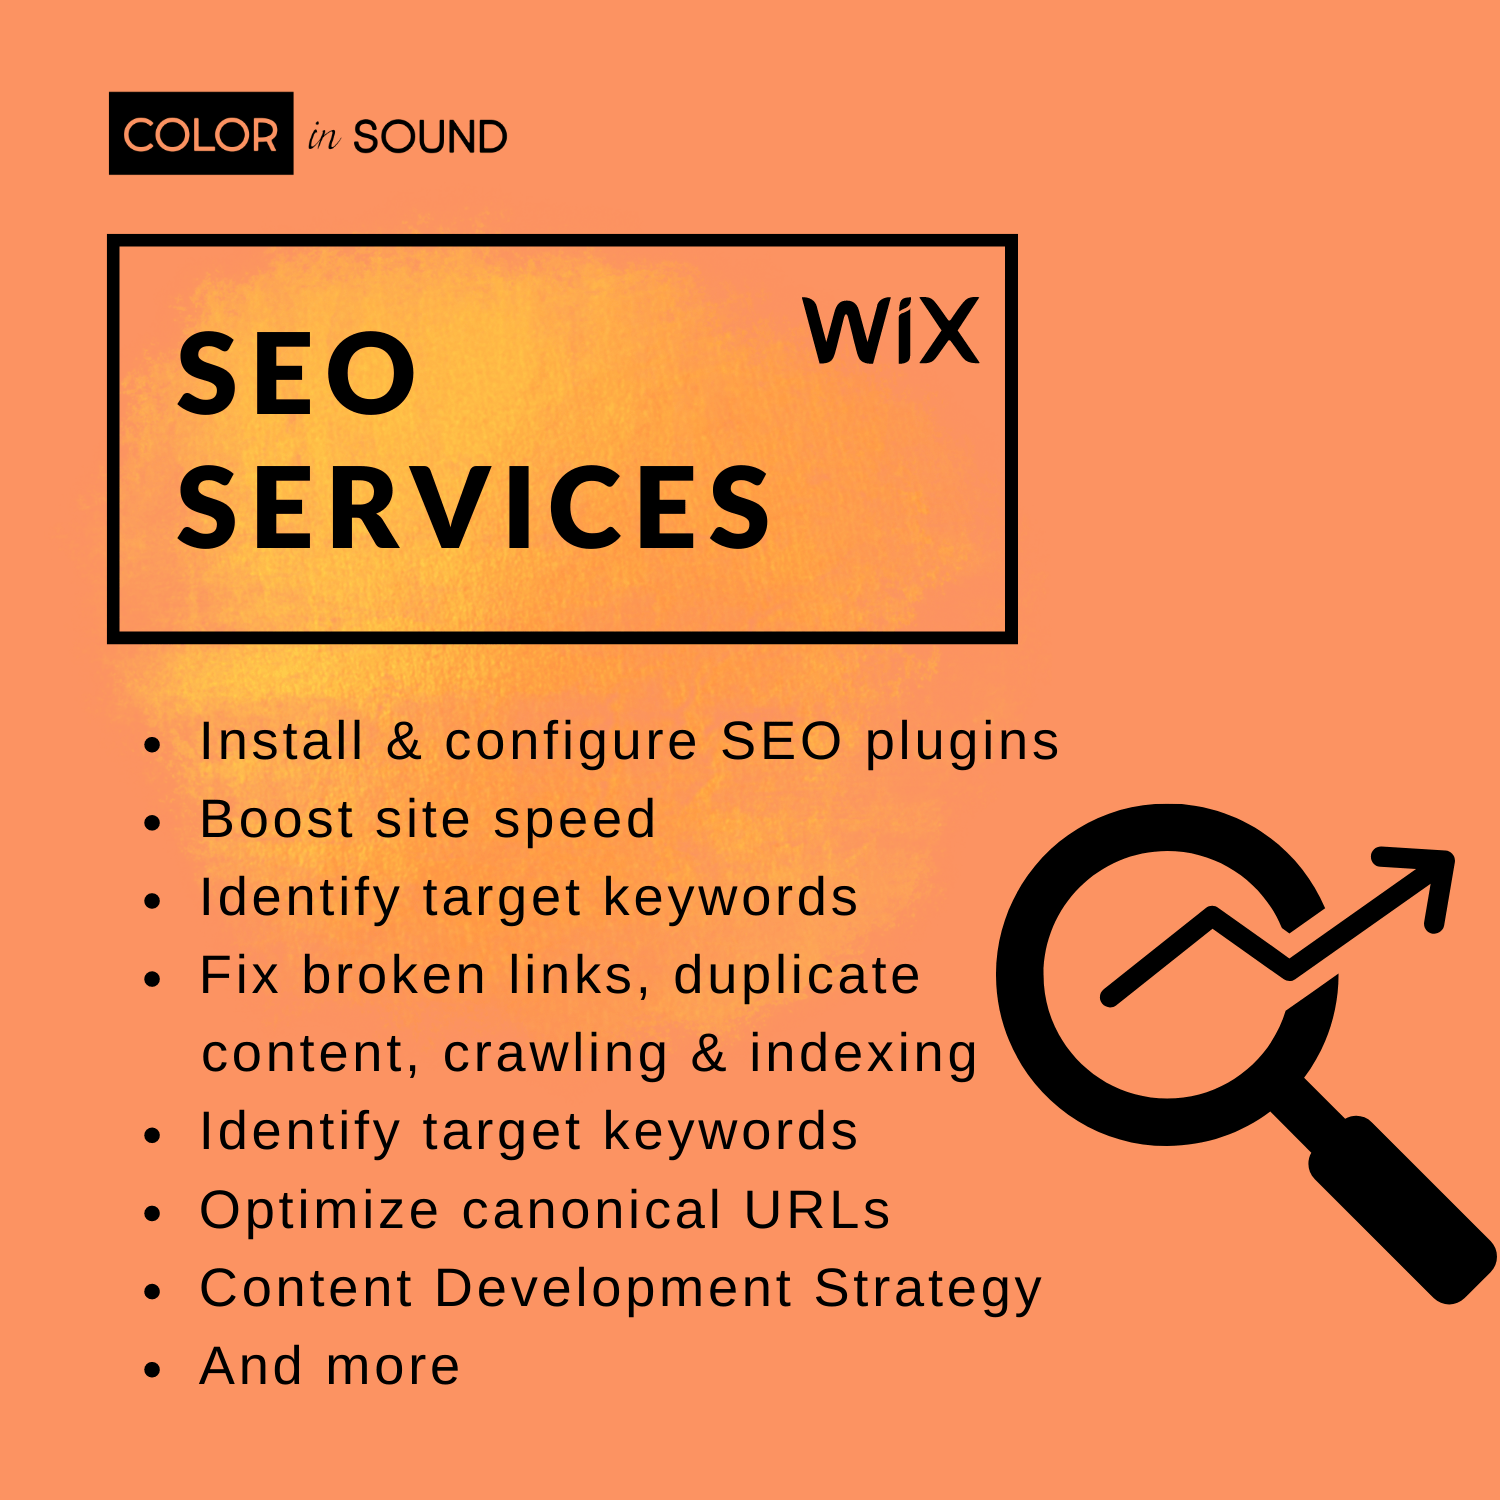 SEO Services for WIX Website